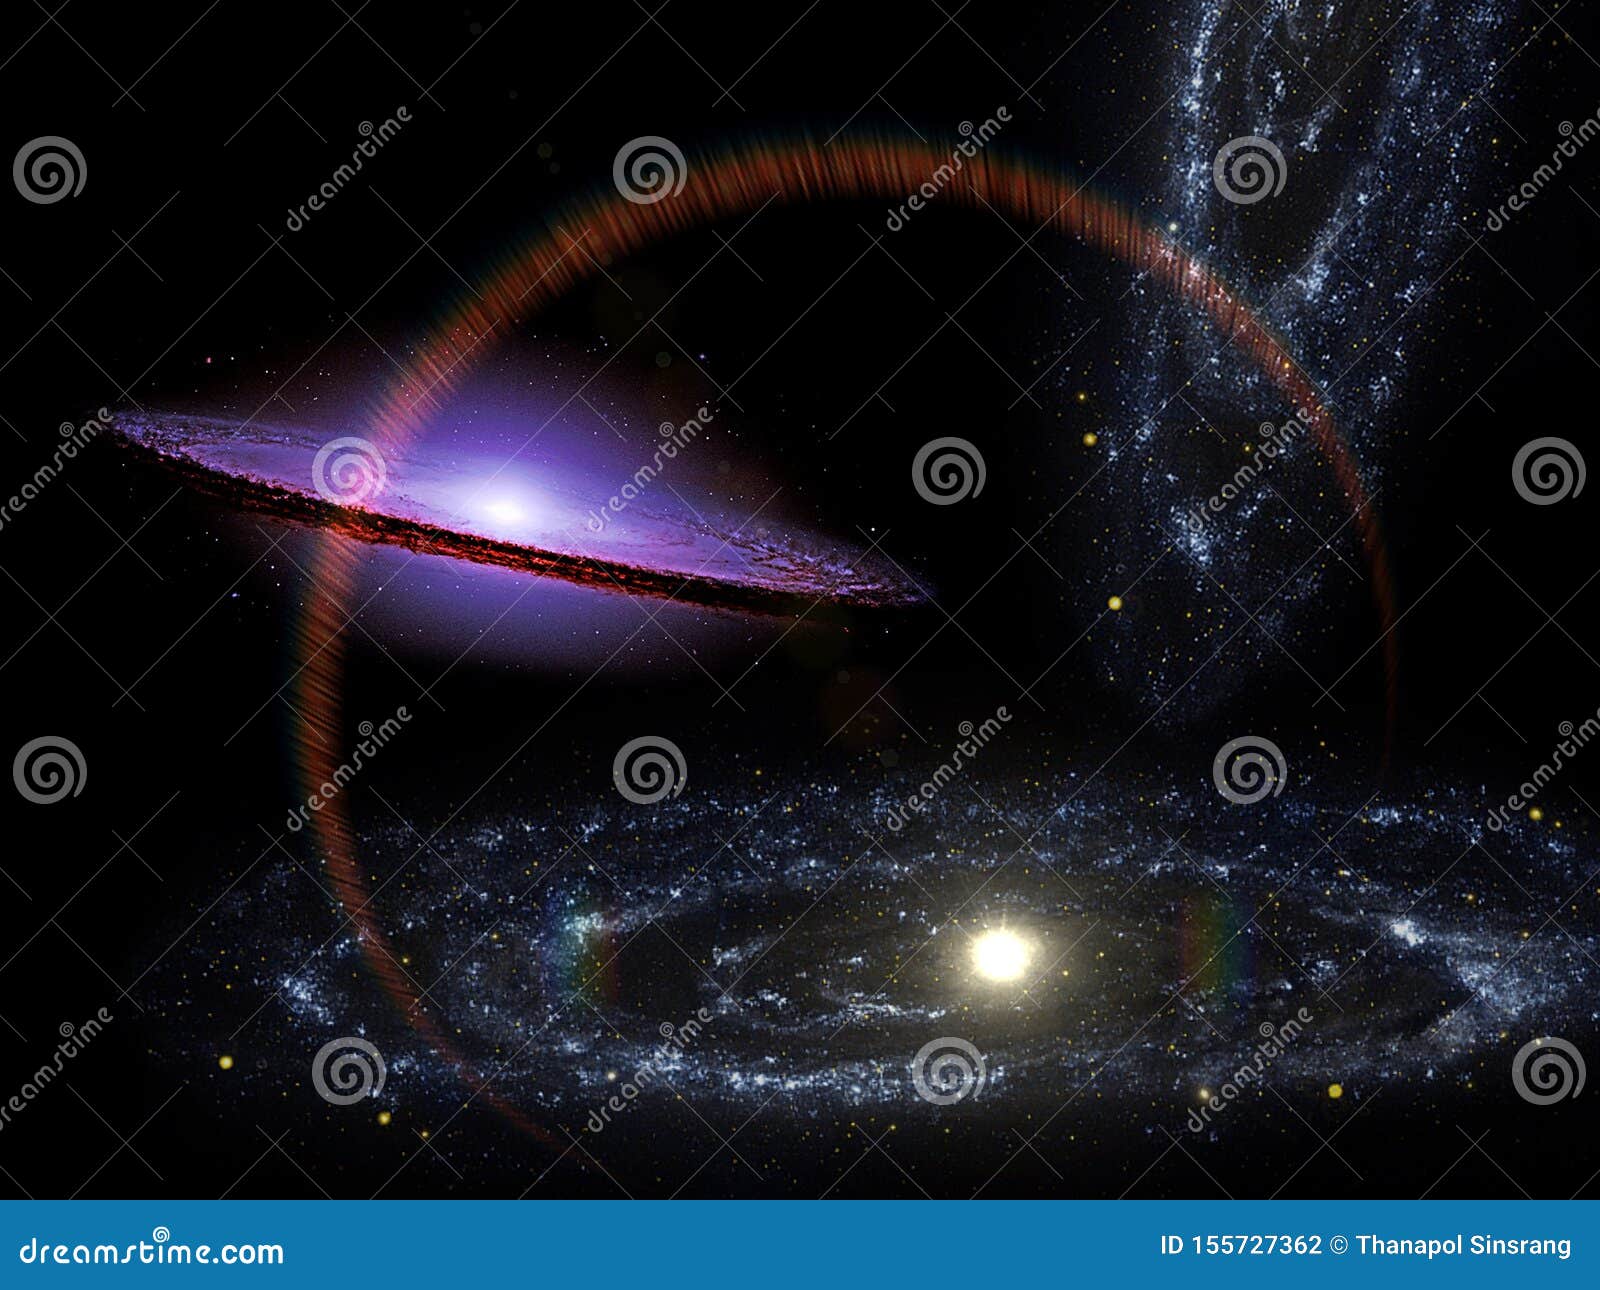 https://thumbs.dreamstime.com/z/planets-galaxy-science-fiction-wallpaper-beauty-deep-space-universe-all-existing-matter-considered-as-whole-cosmos-155727362.jpg